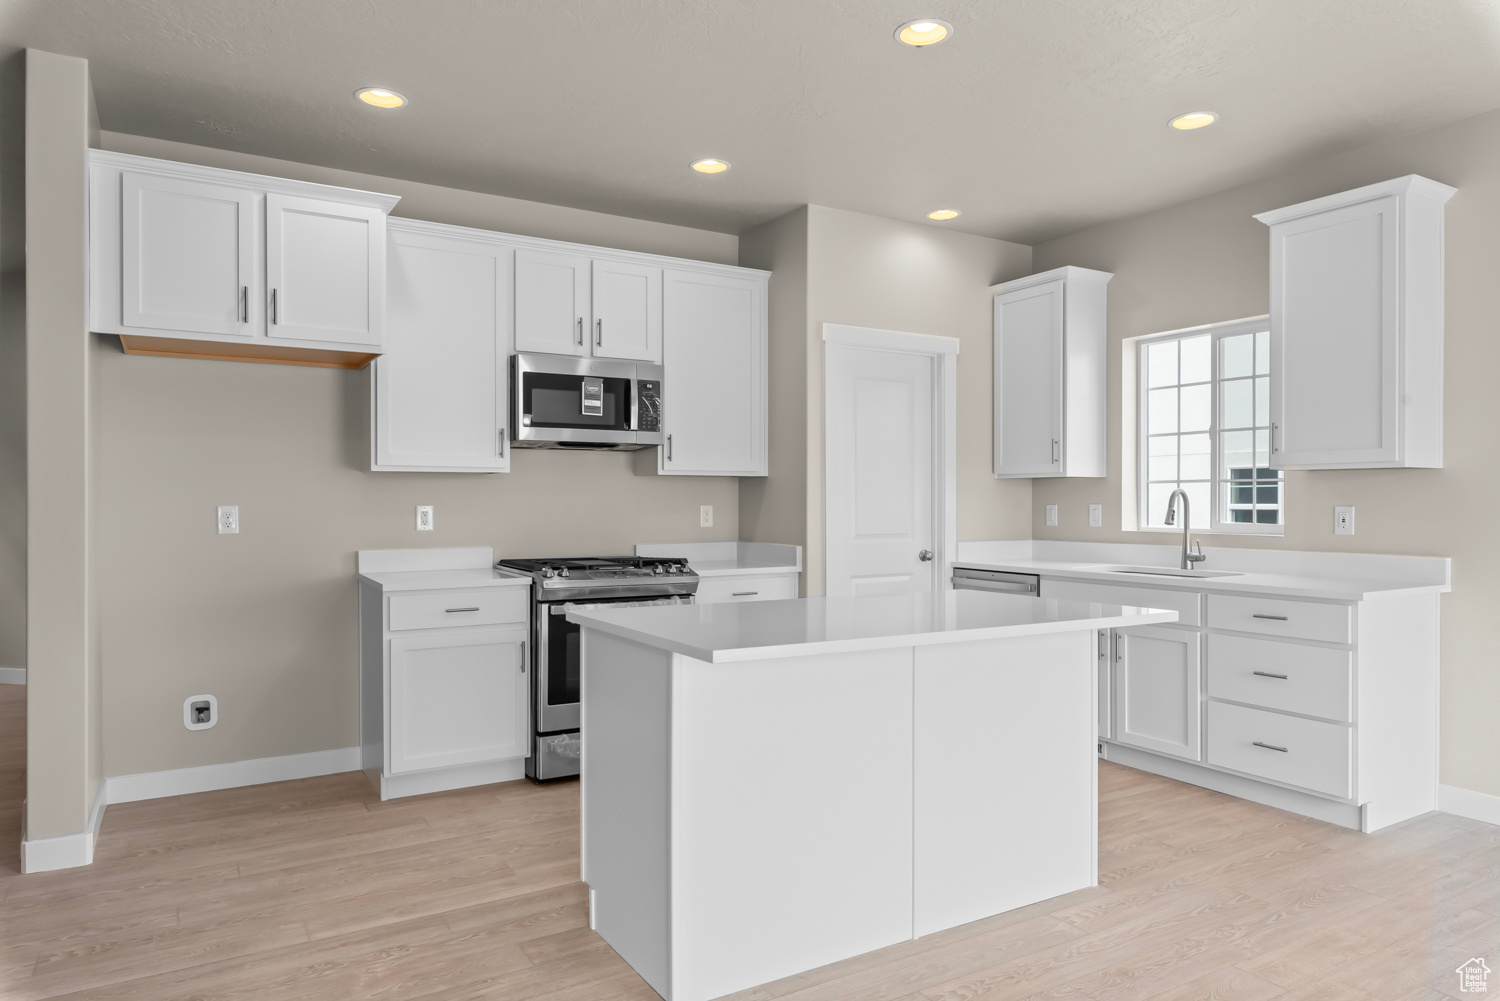 Kitchen featuring appliances with stainless steel finishes, white cabinets, sink, a center island, and light wood-type flooring